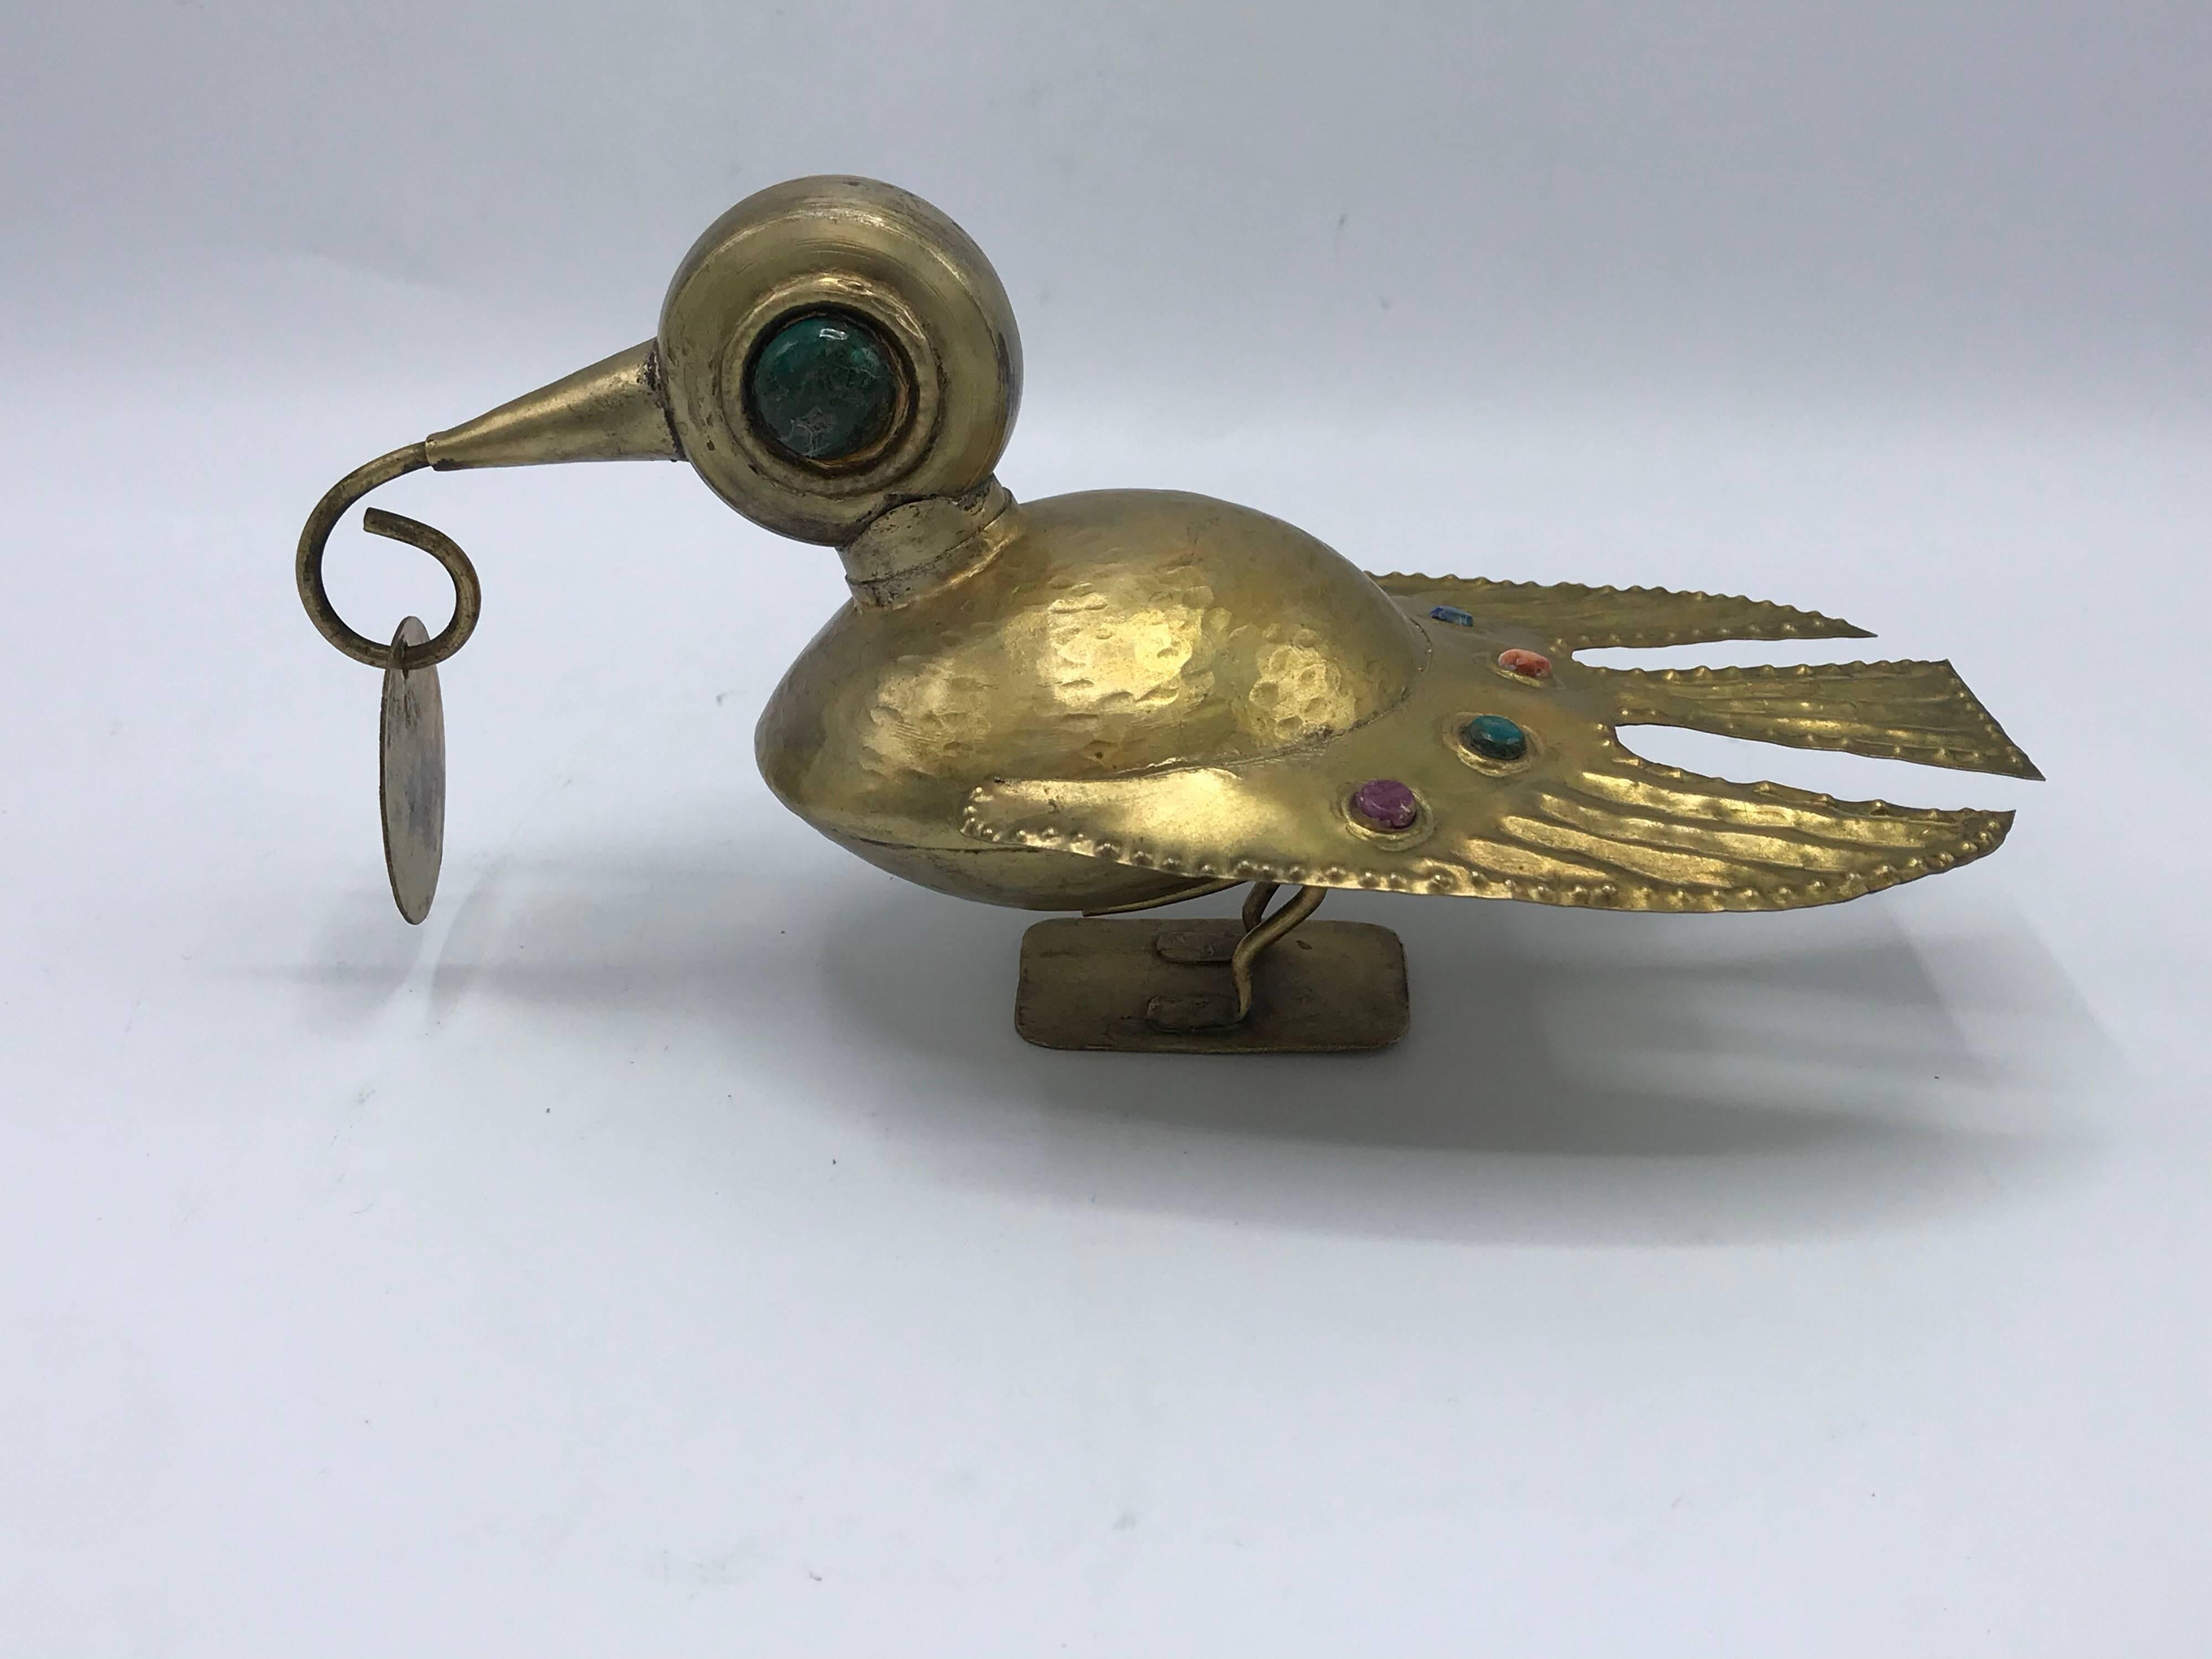 Offered is a lovely, 1970s Mexican hammered-brass bird sculpture with simulated cabuchons of amethyst, emerald, citrine, and sapphire jewels.